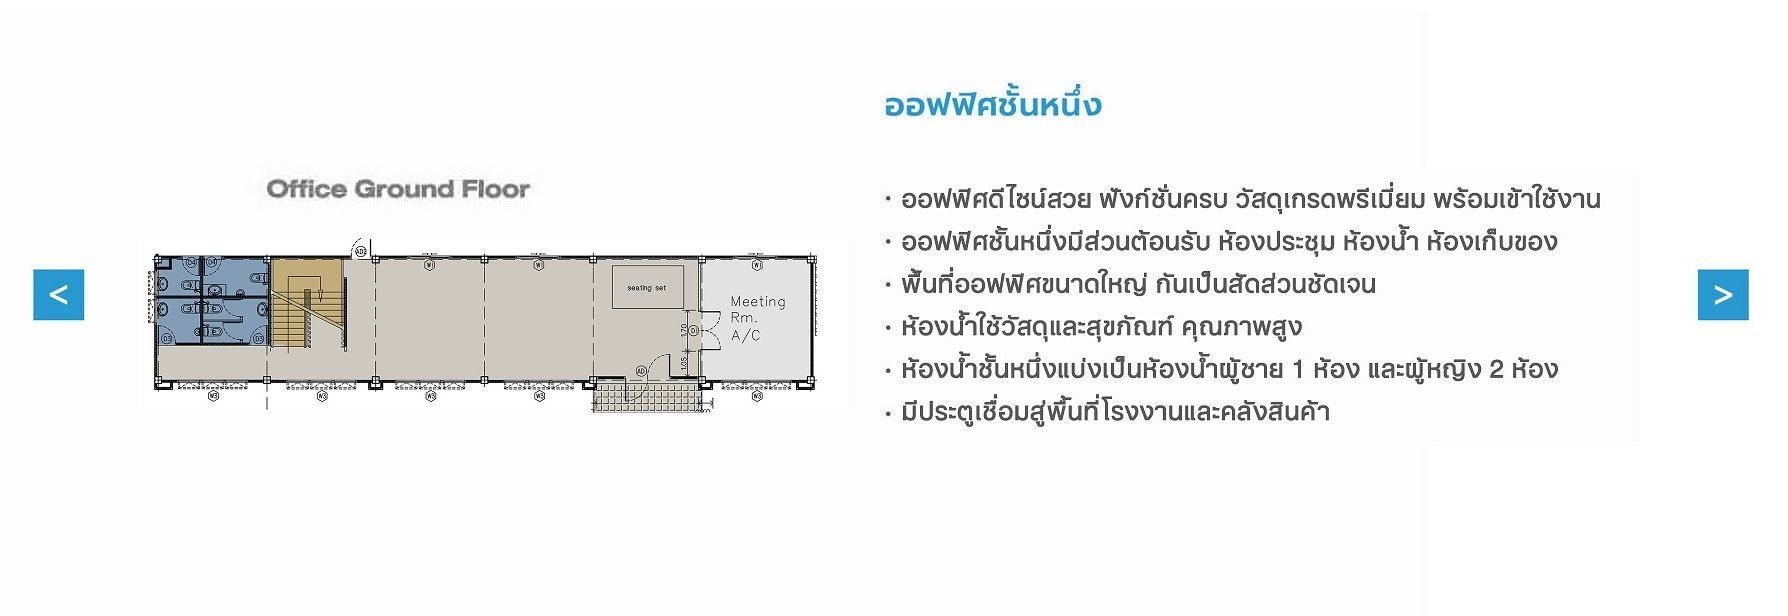 Pro Ind Factory for Rent Unit E Office 1 Layout Plan